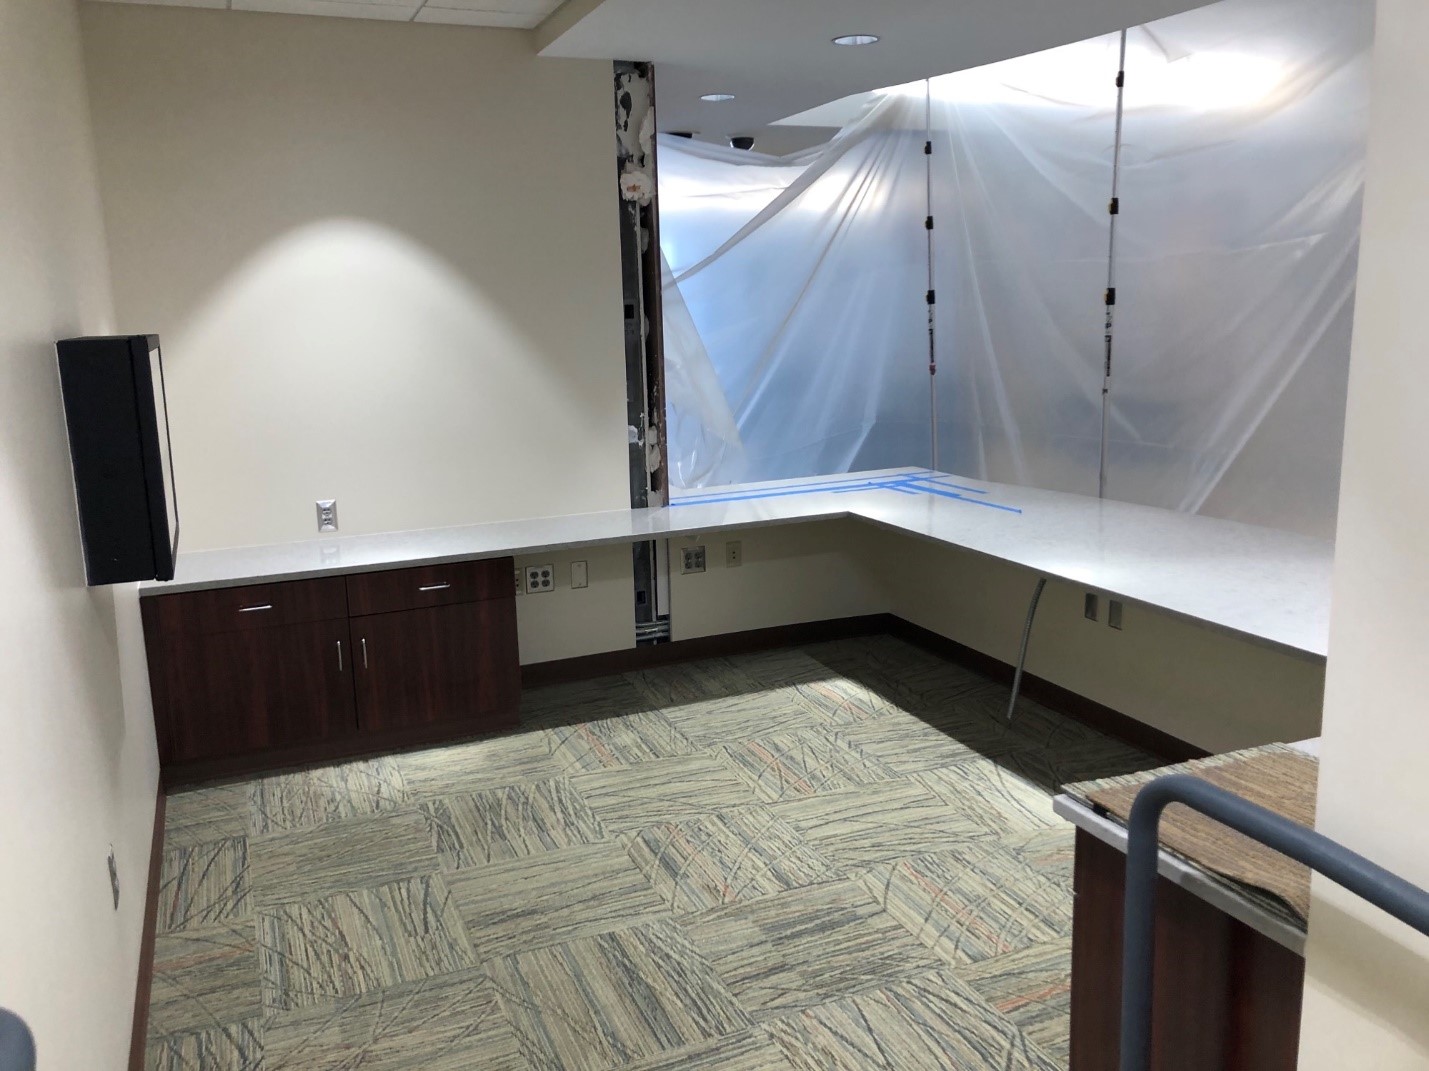 Photo: a desk station under construction at Central Office